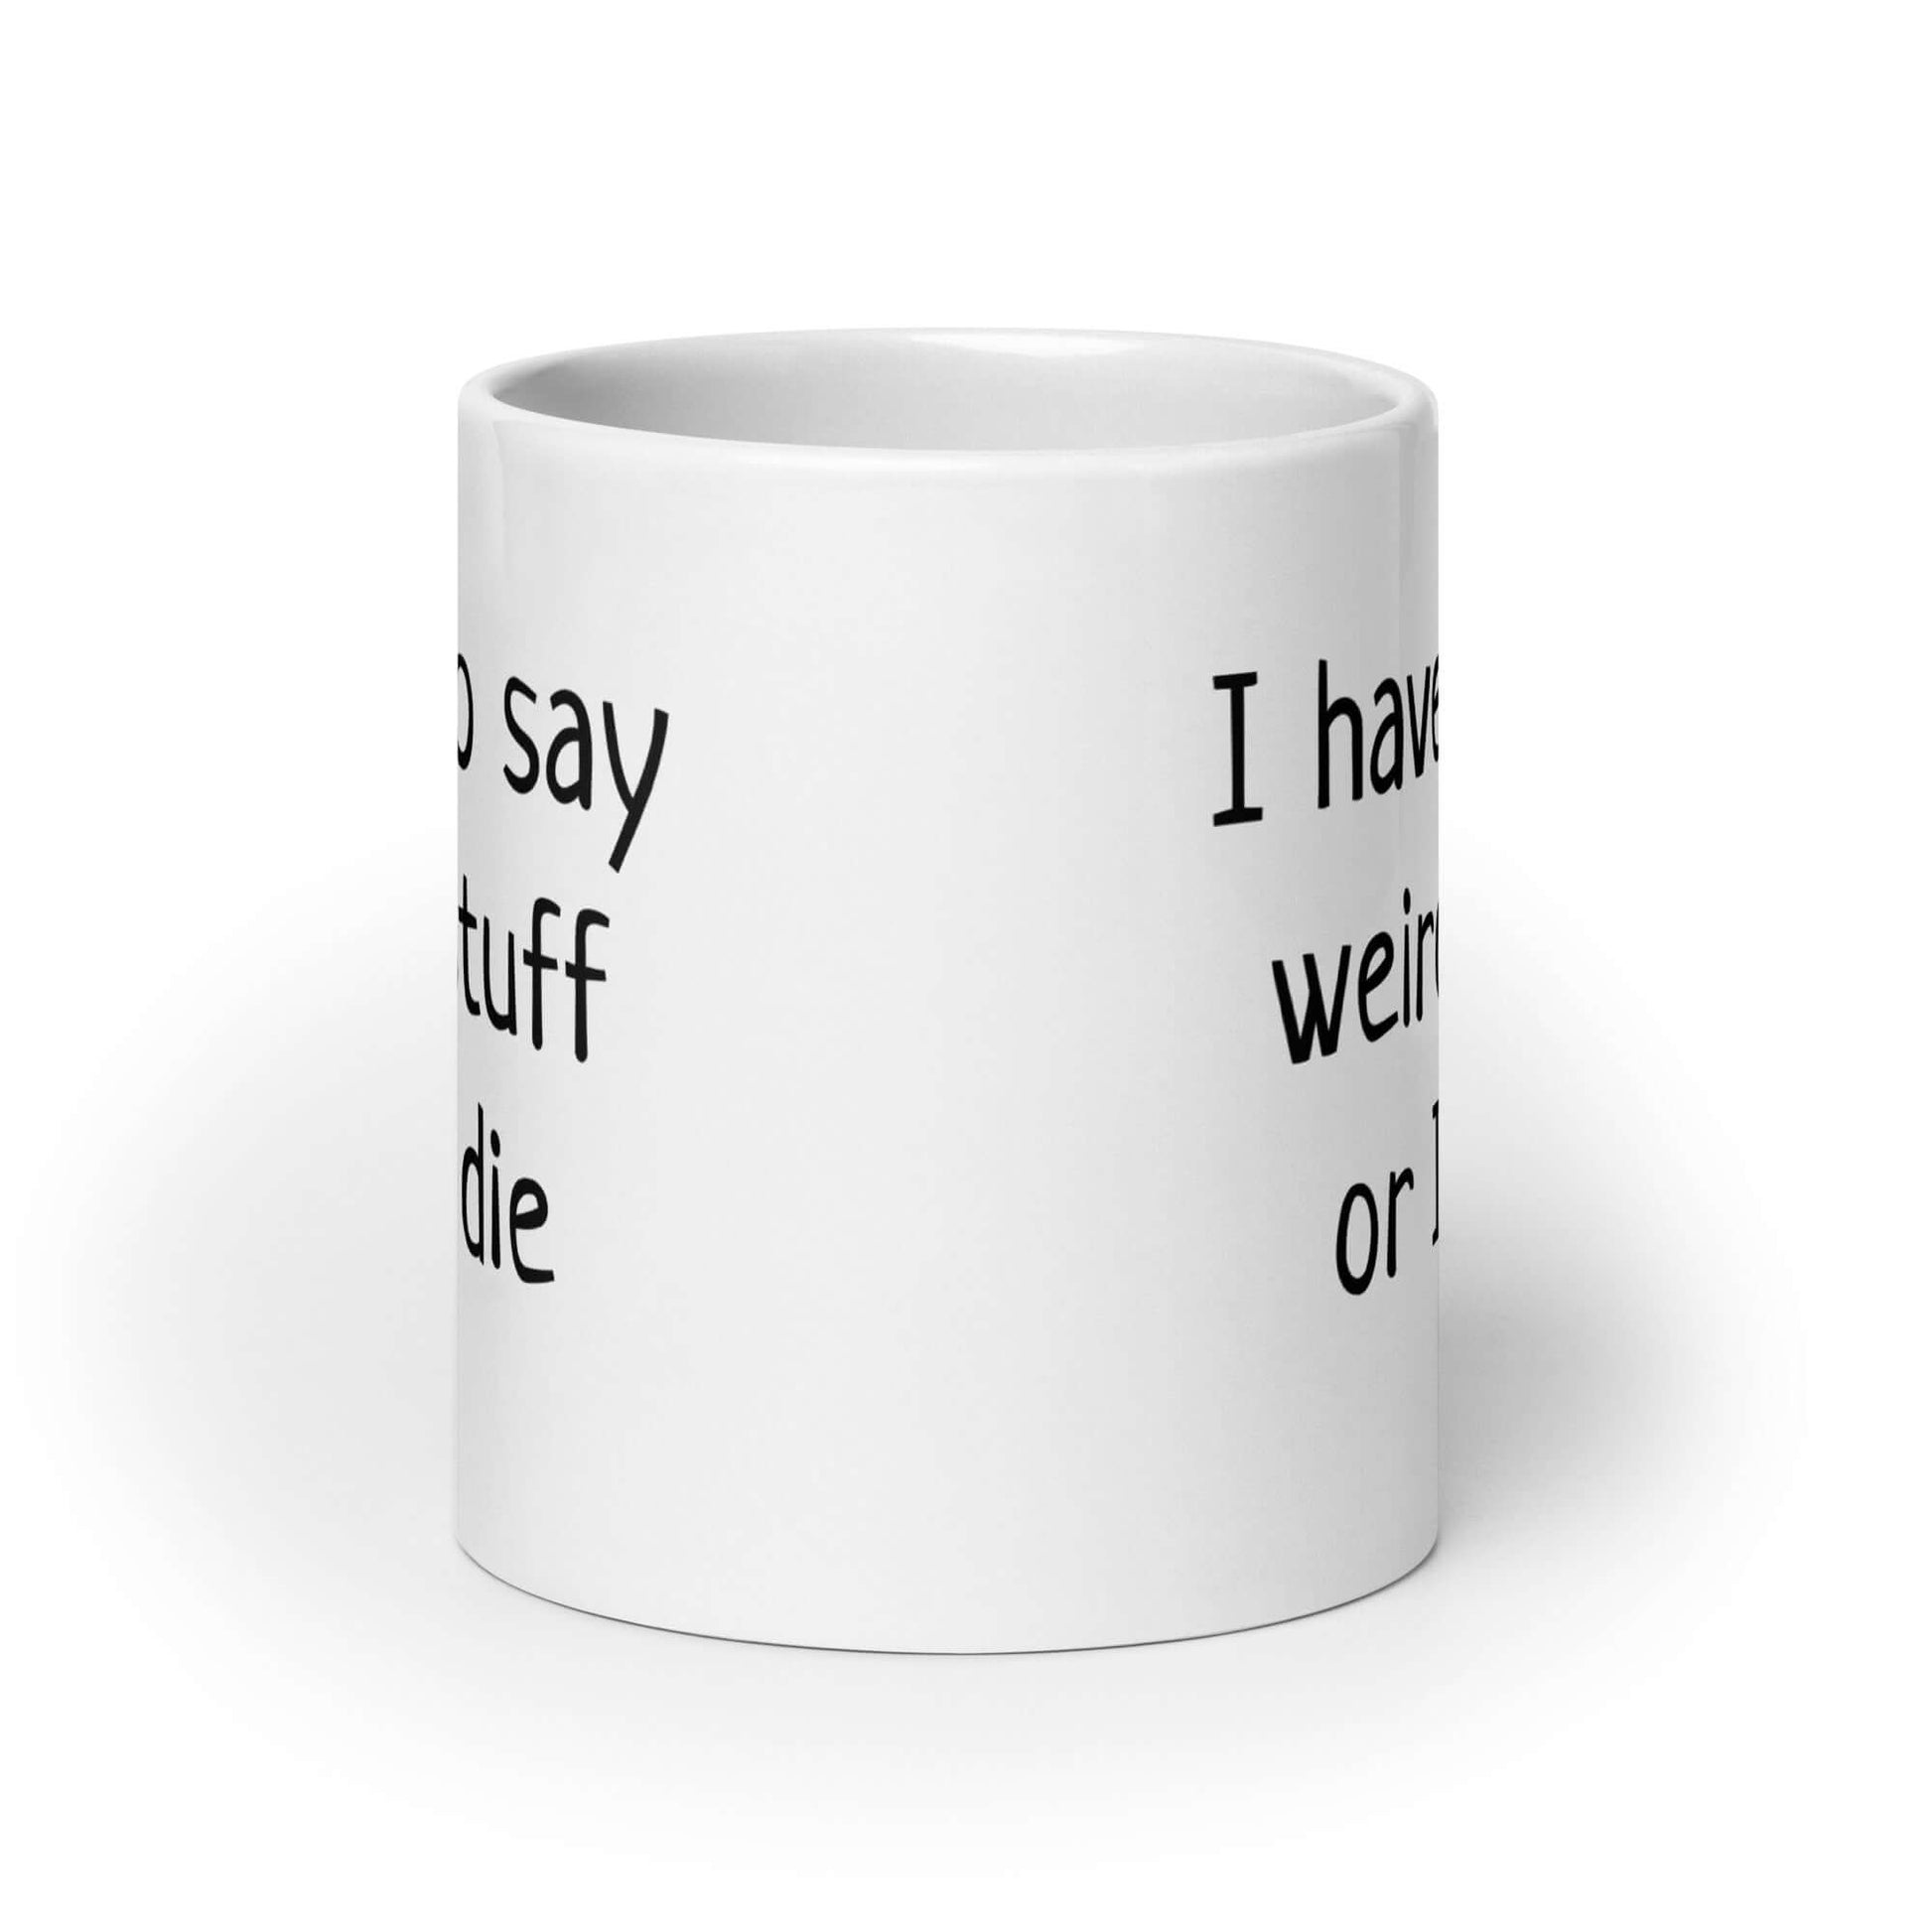 White ceramic coffee mug with the phrase I have to say weird stuff or I'll die printed on both sides.